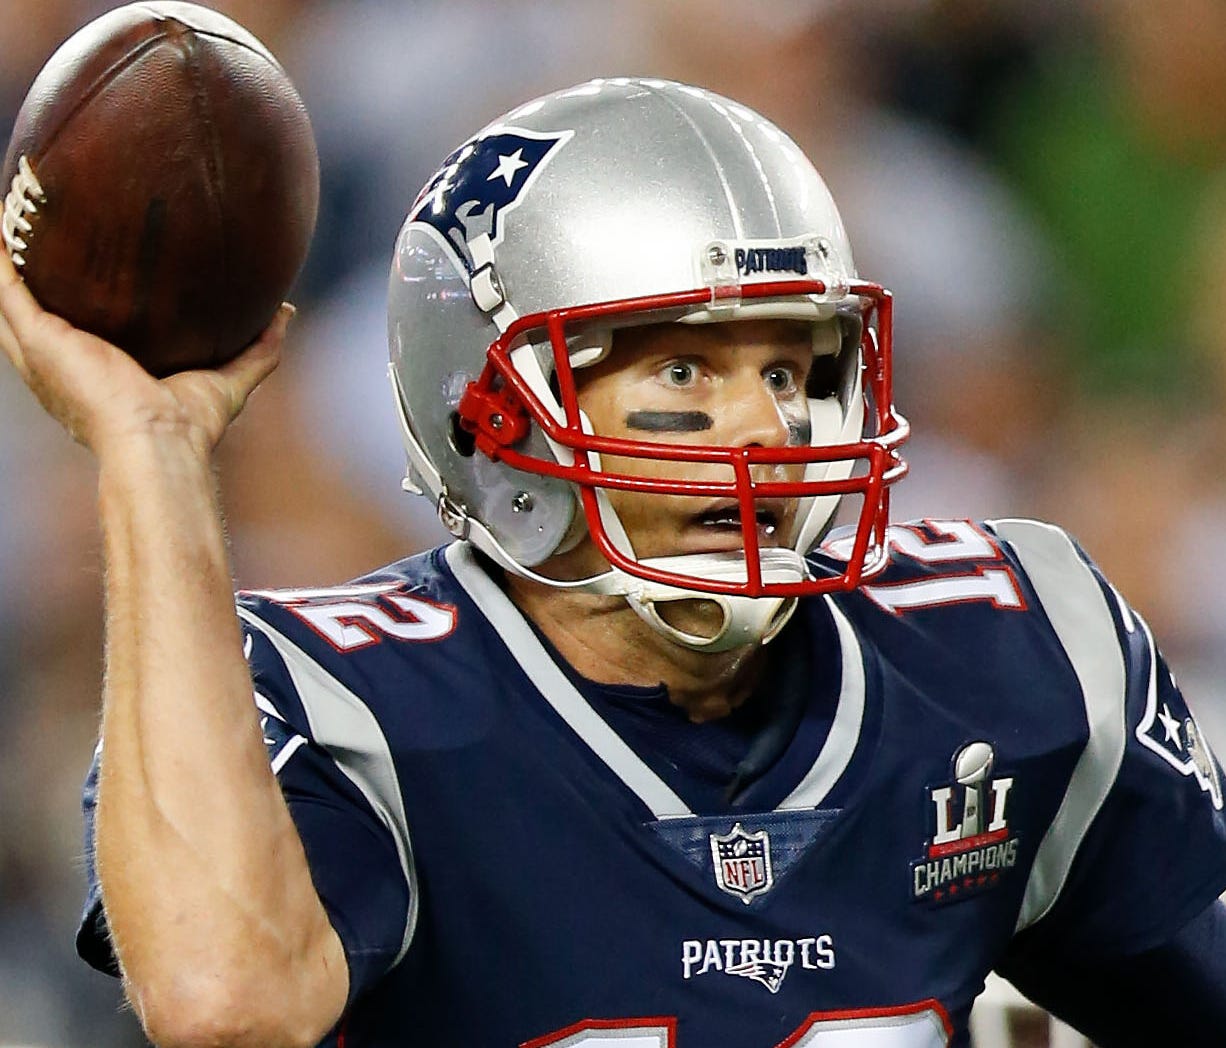 Quarterback Tom Brady and the Patriots are coming off a loss to the Chiefs in Week 1.